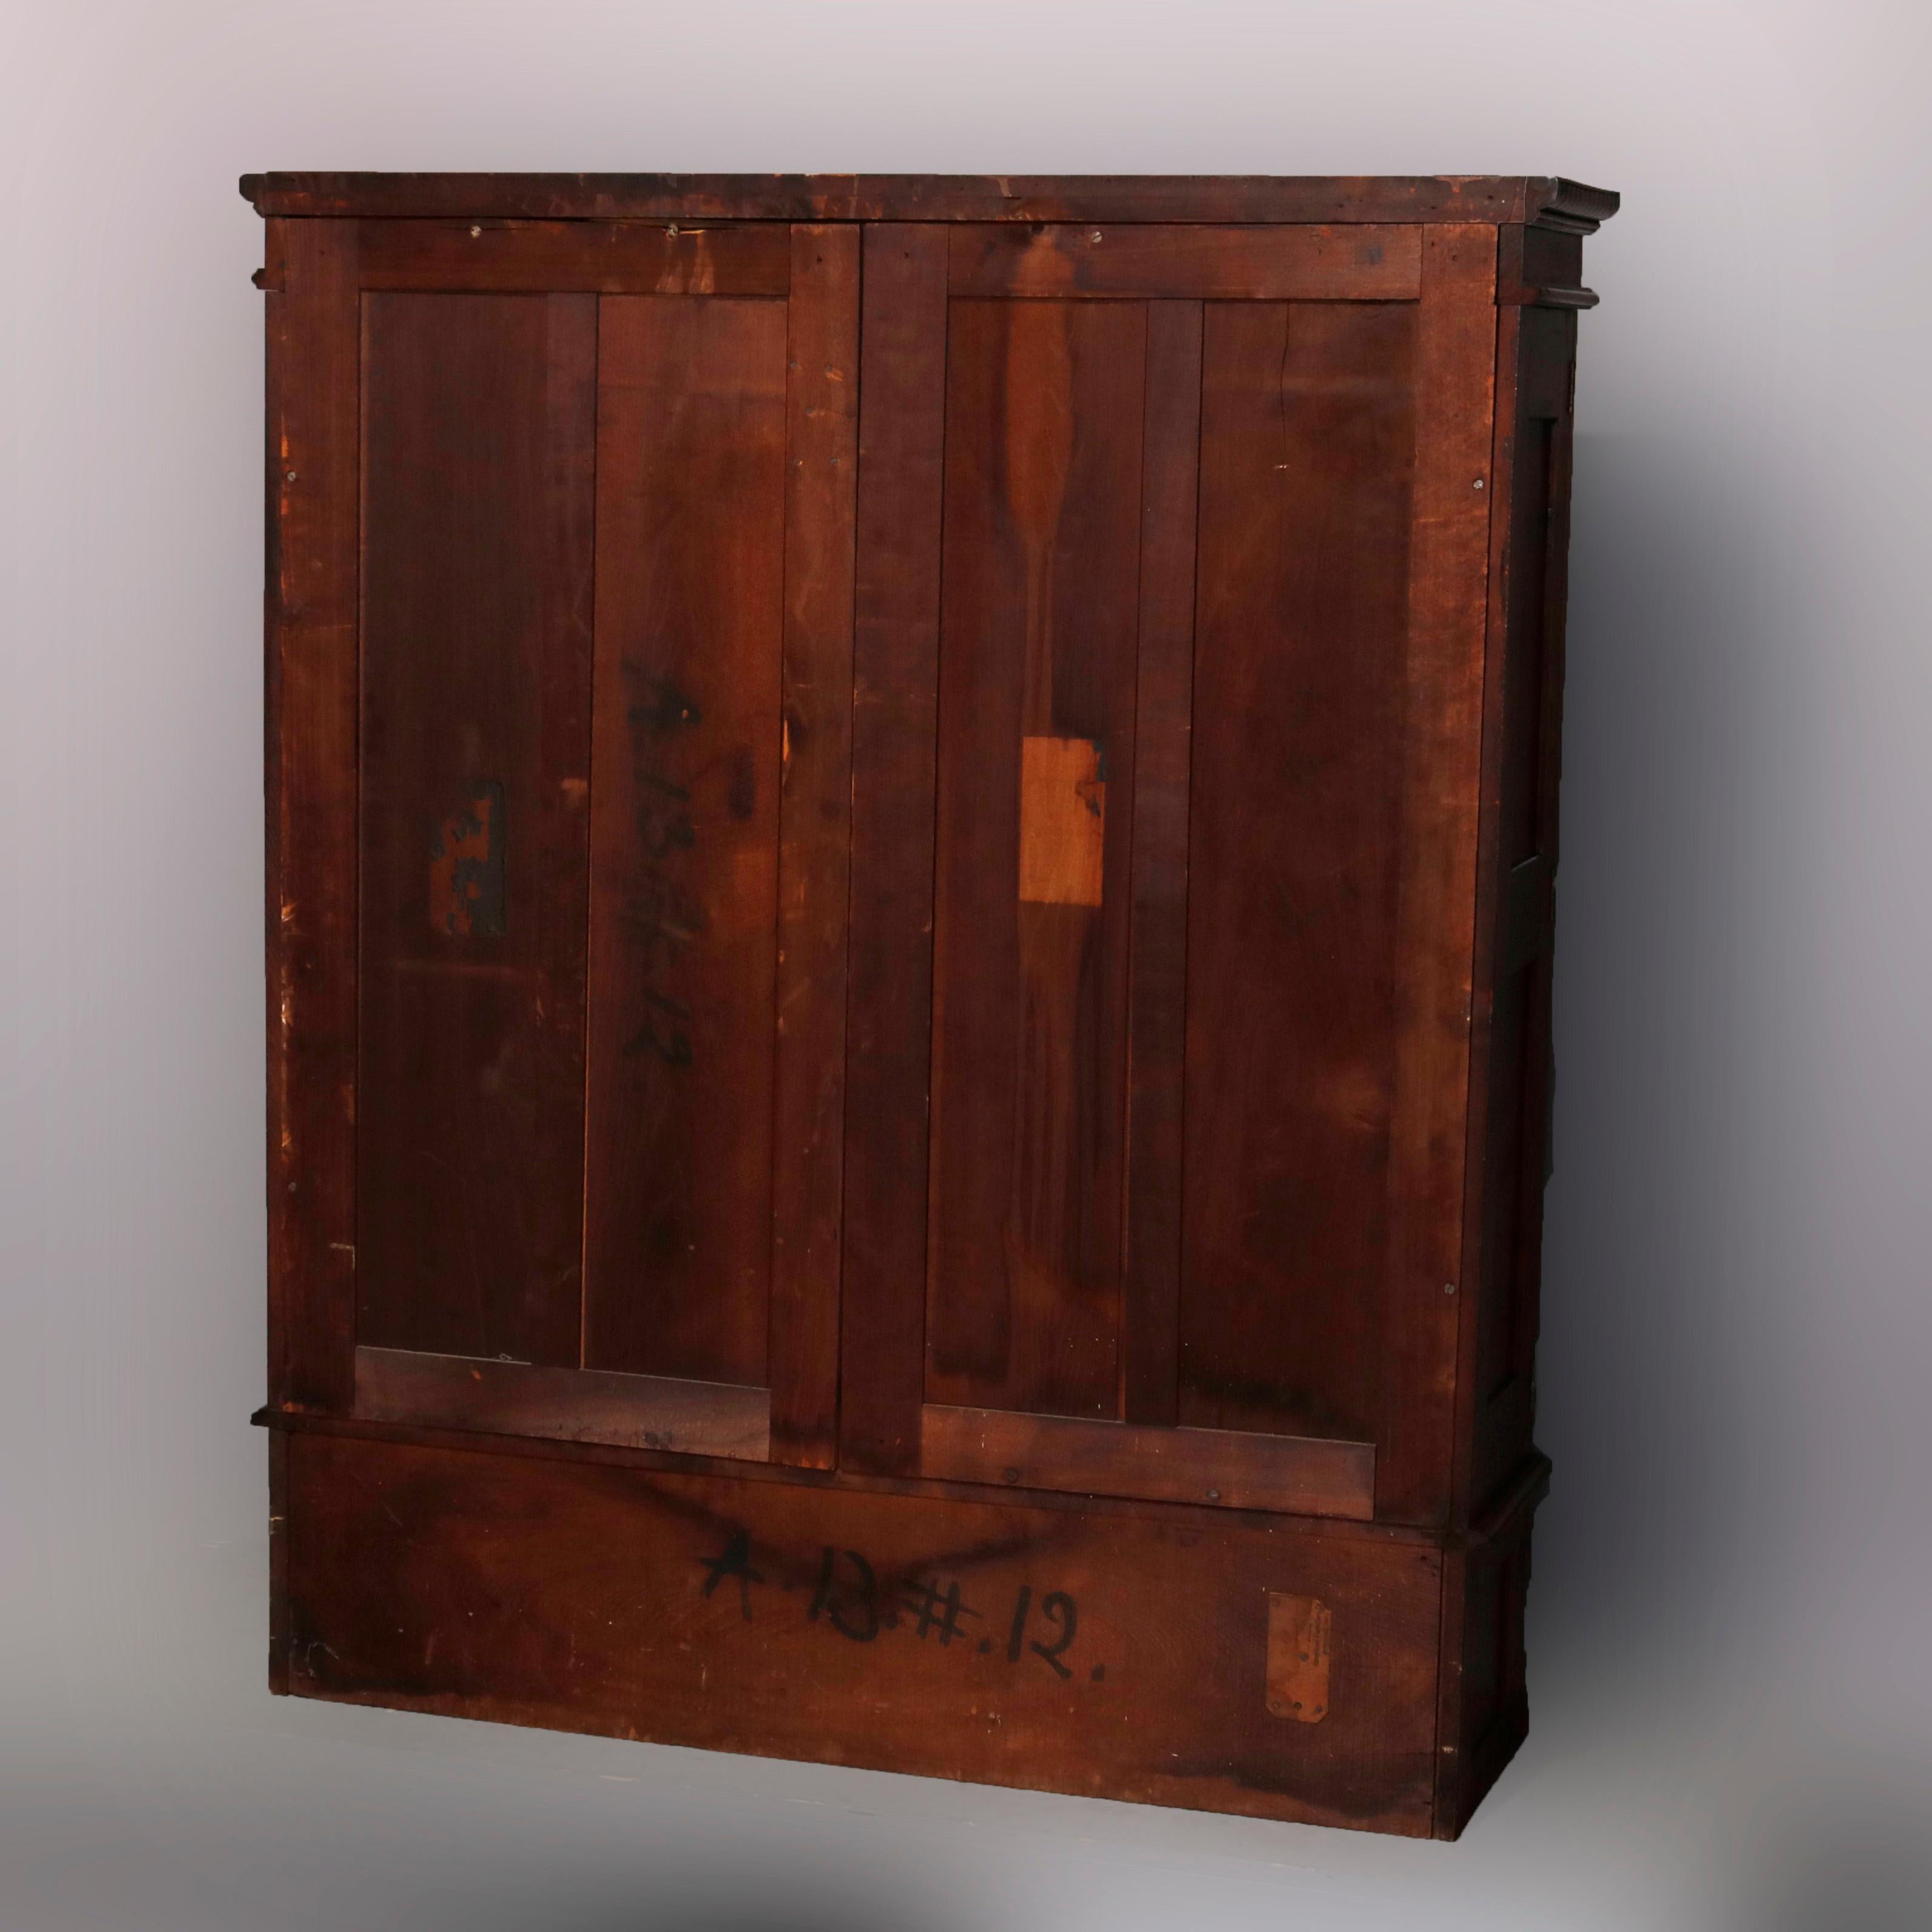 Carved Victorian Burl Walnut Enclosed Double Door Bookcase with Drawers, circa 1890